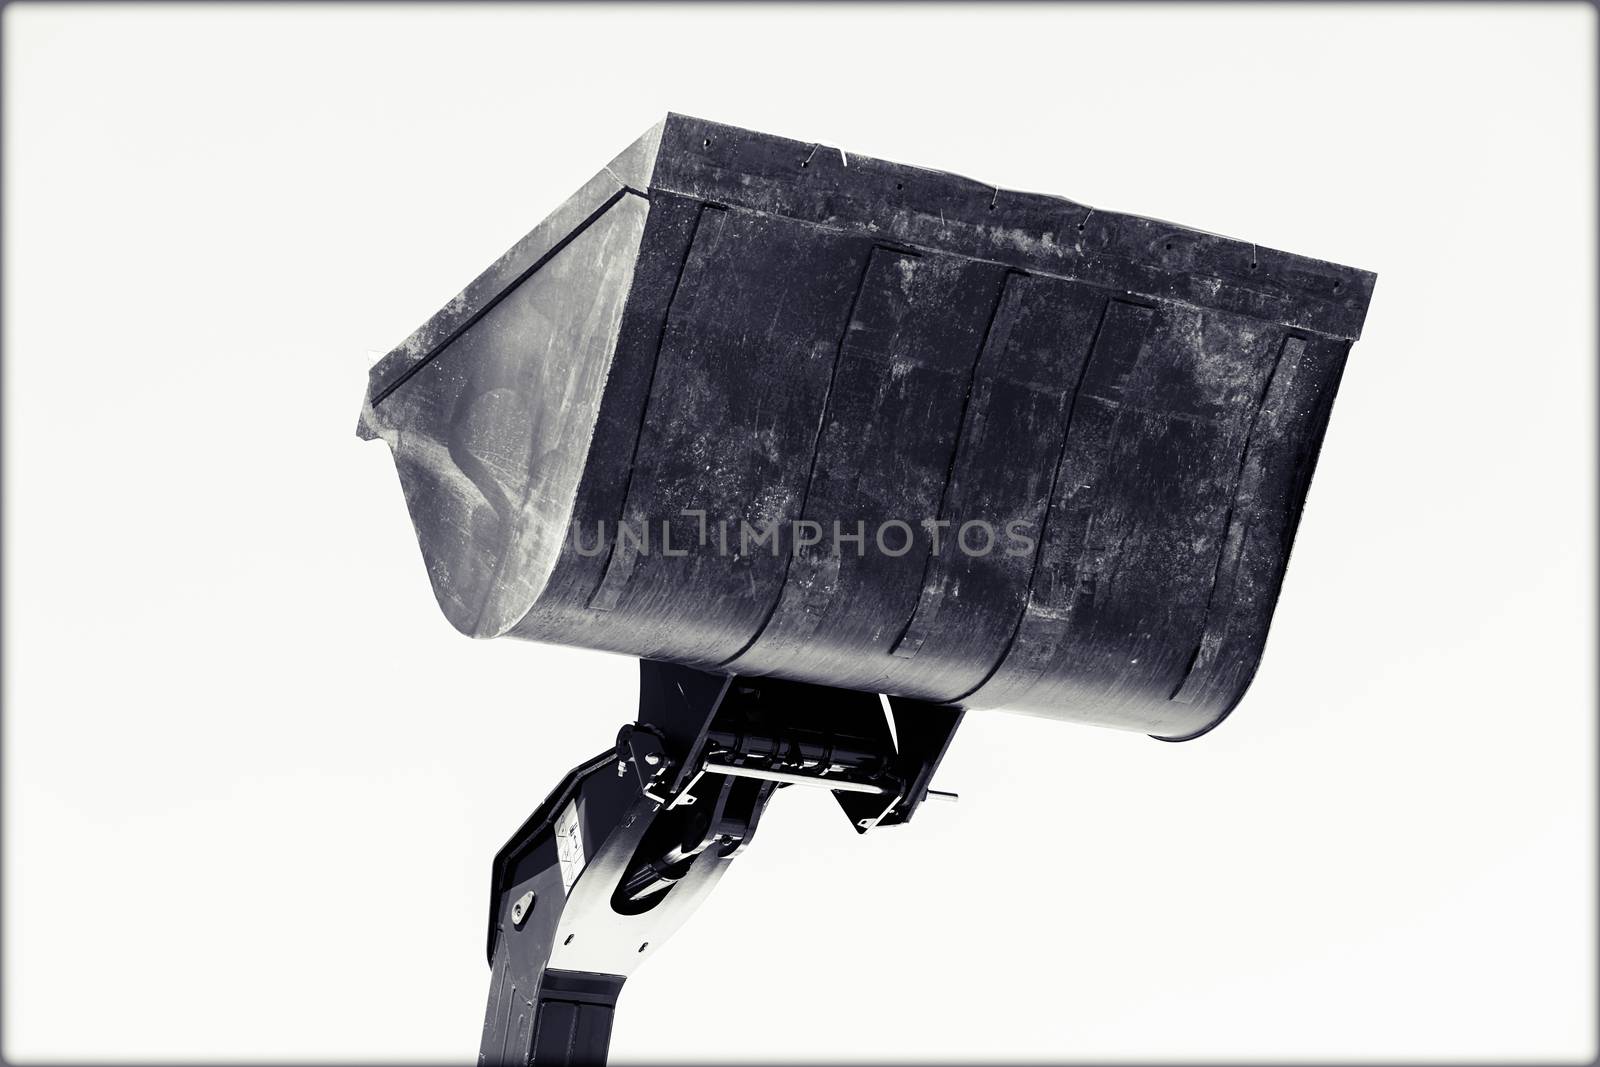 erected bucket for excavator, note shallow depth of field